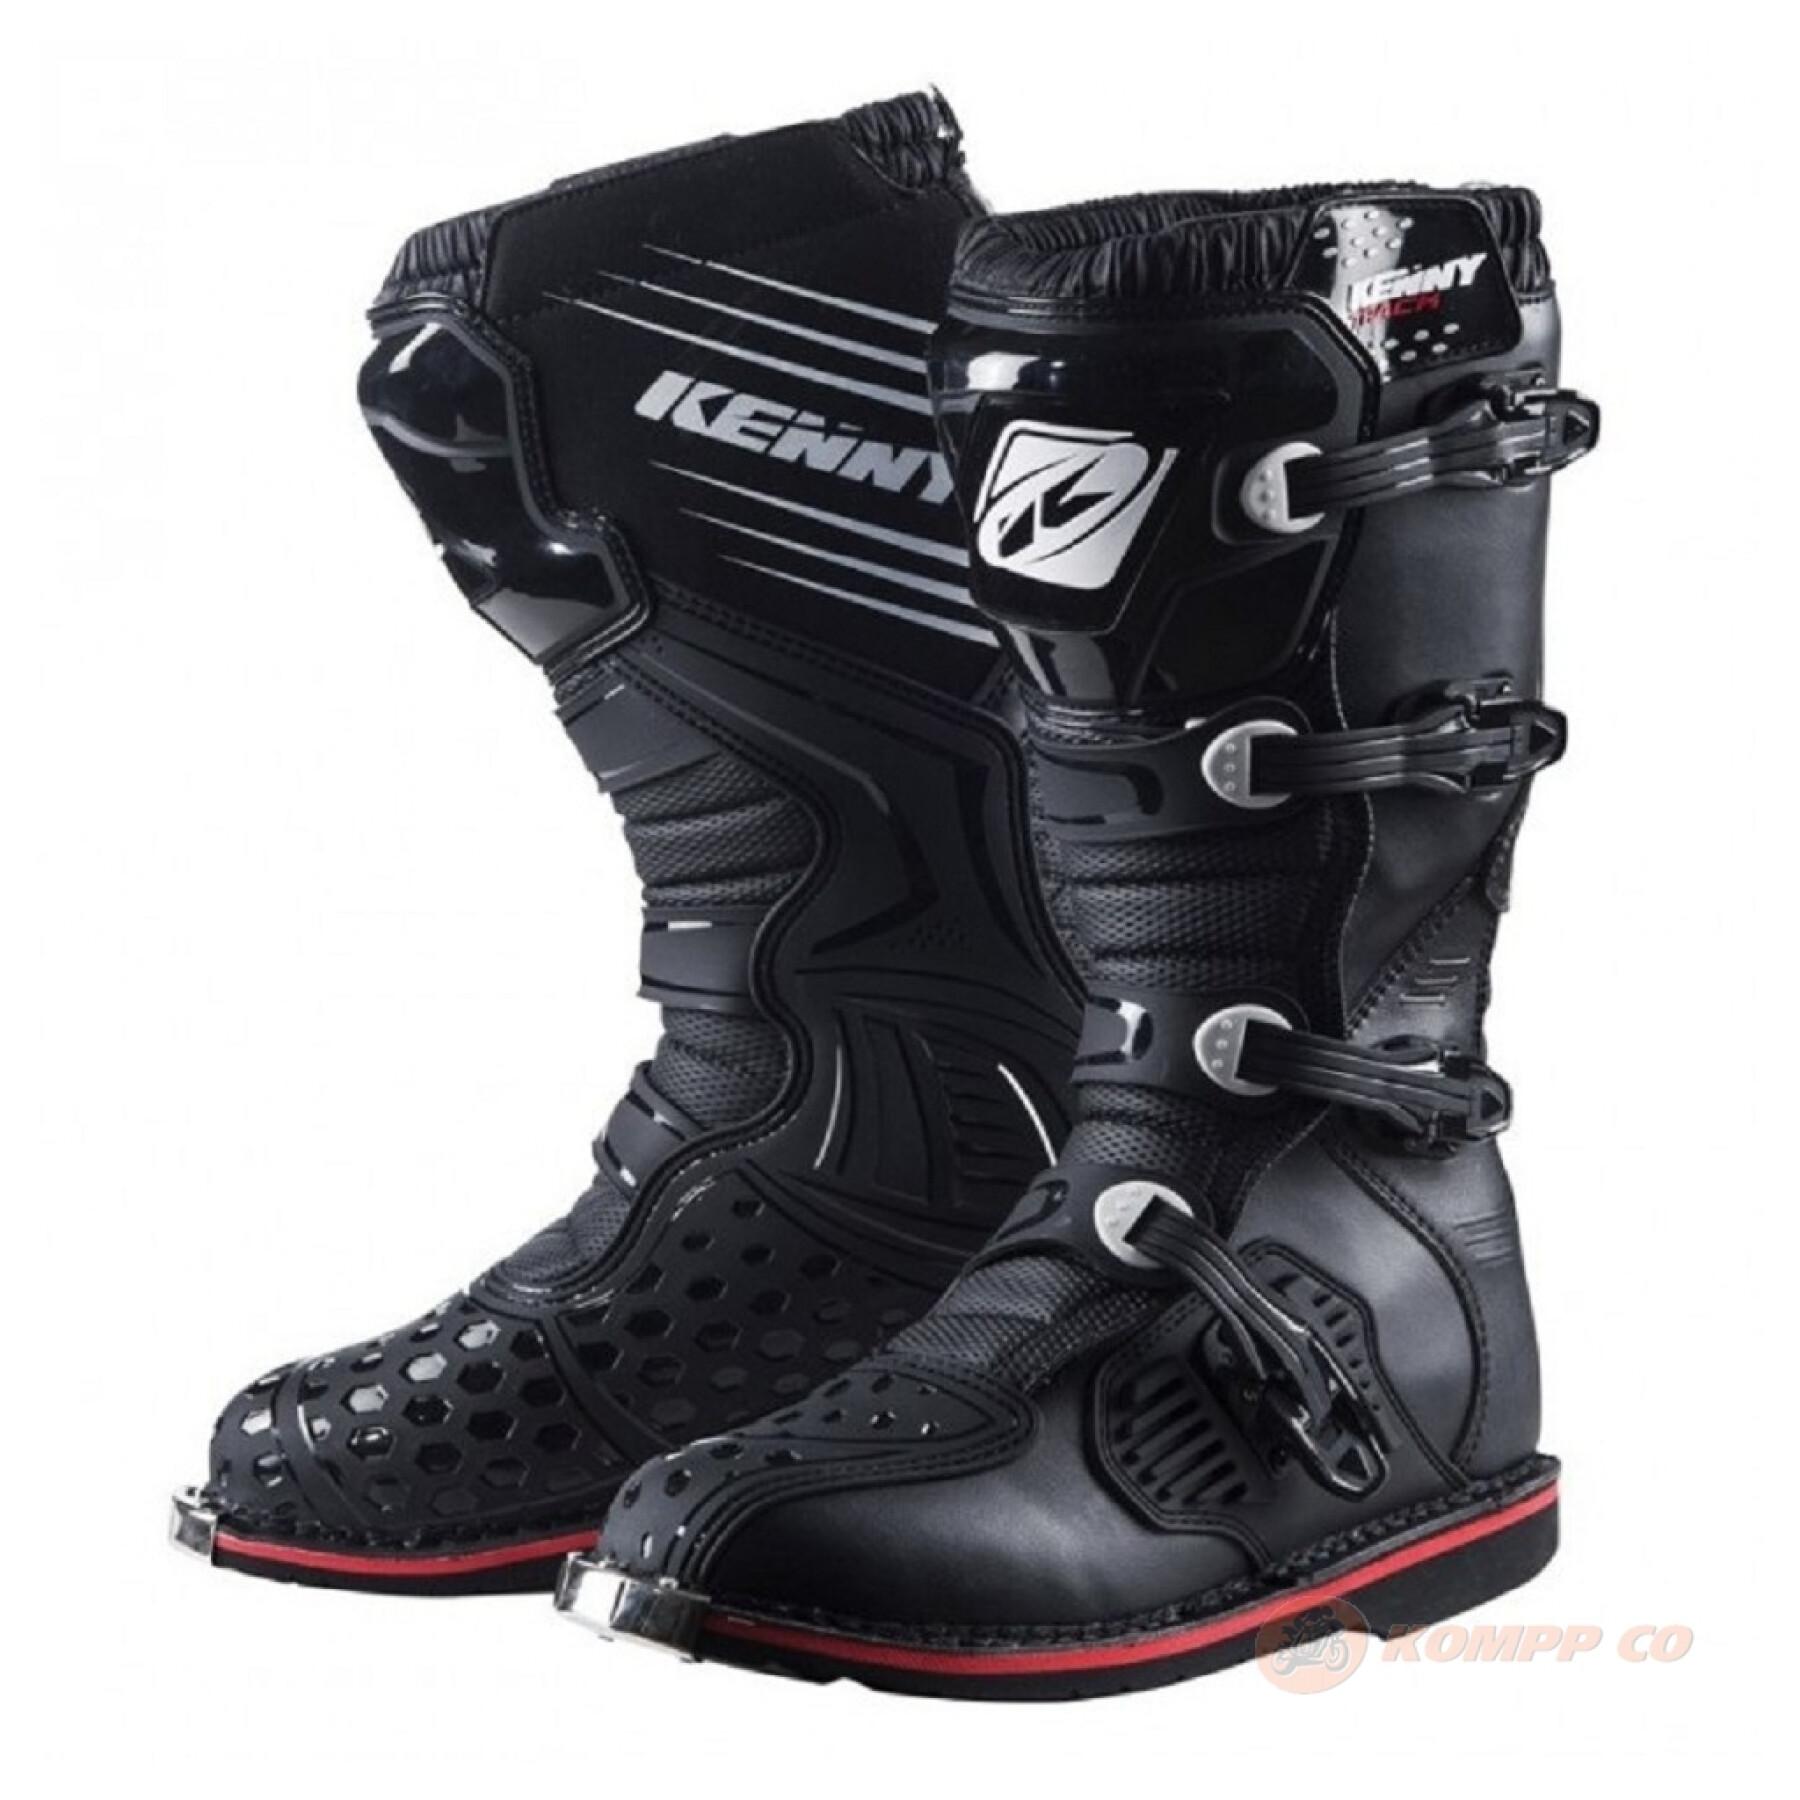 Motorcycle cross boots for kids Kenny track